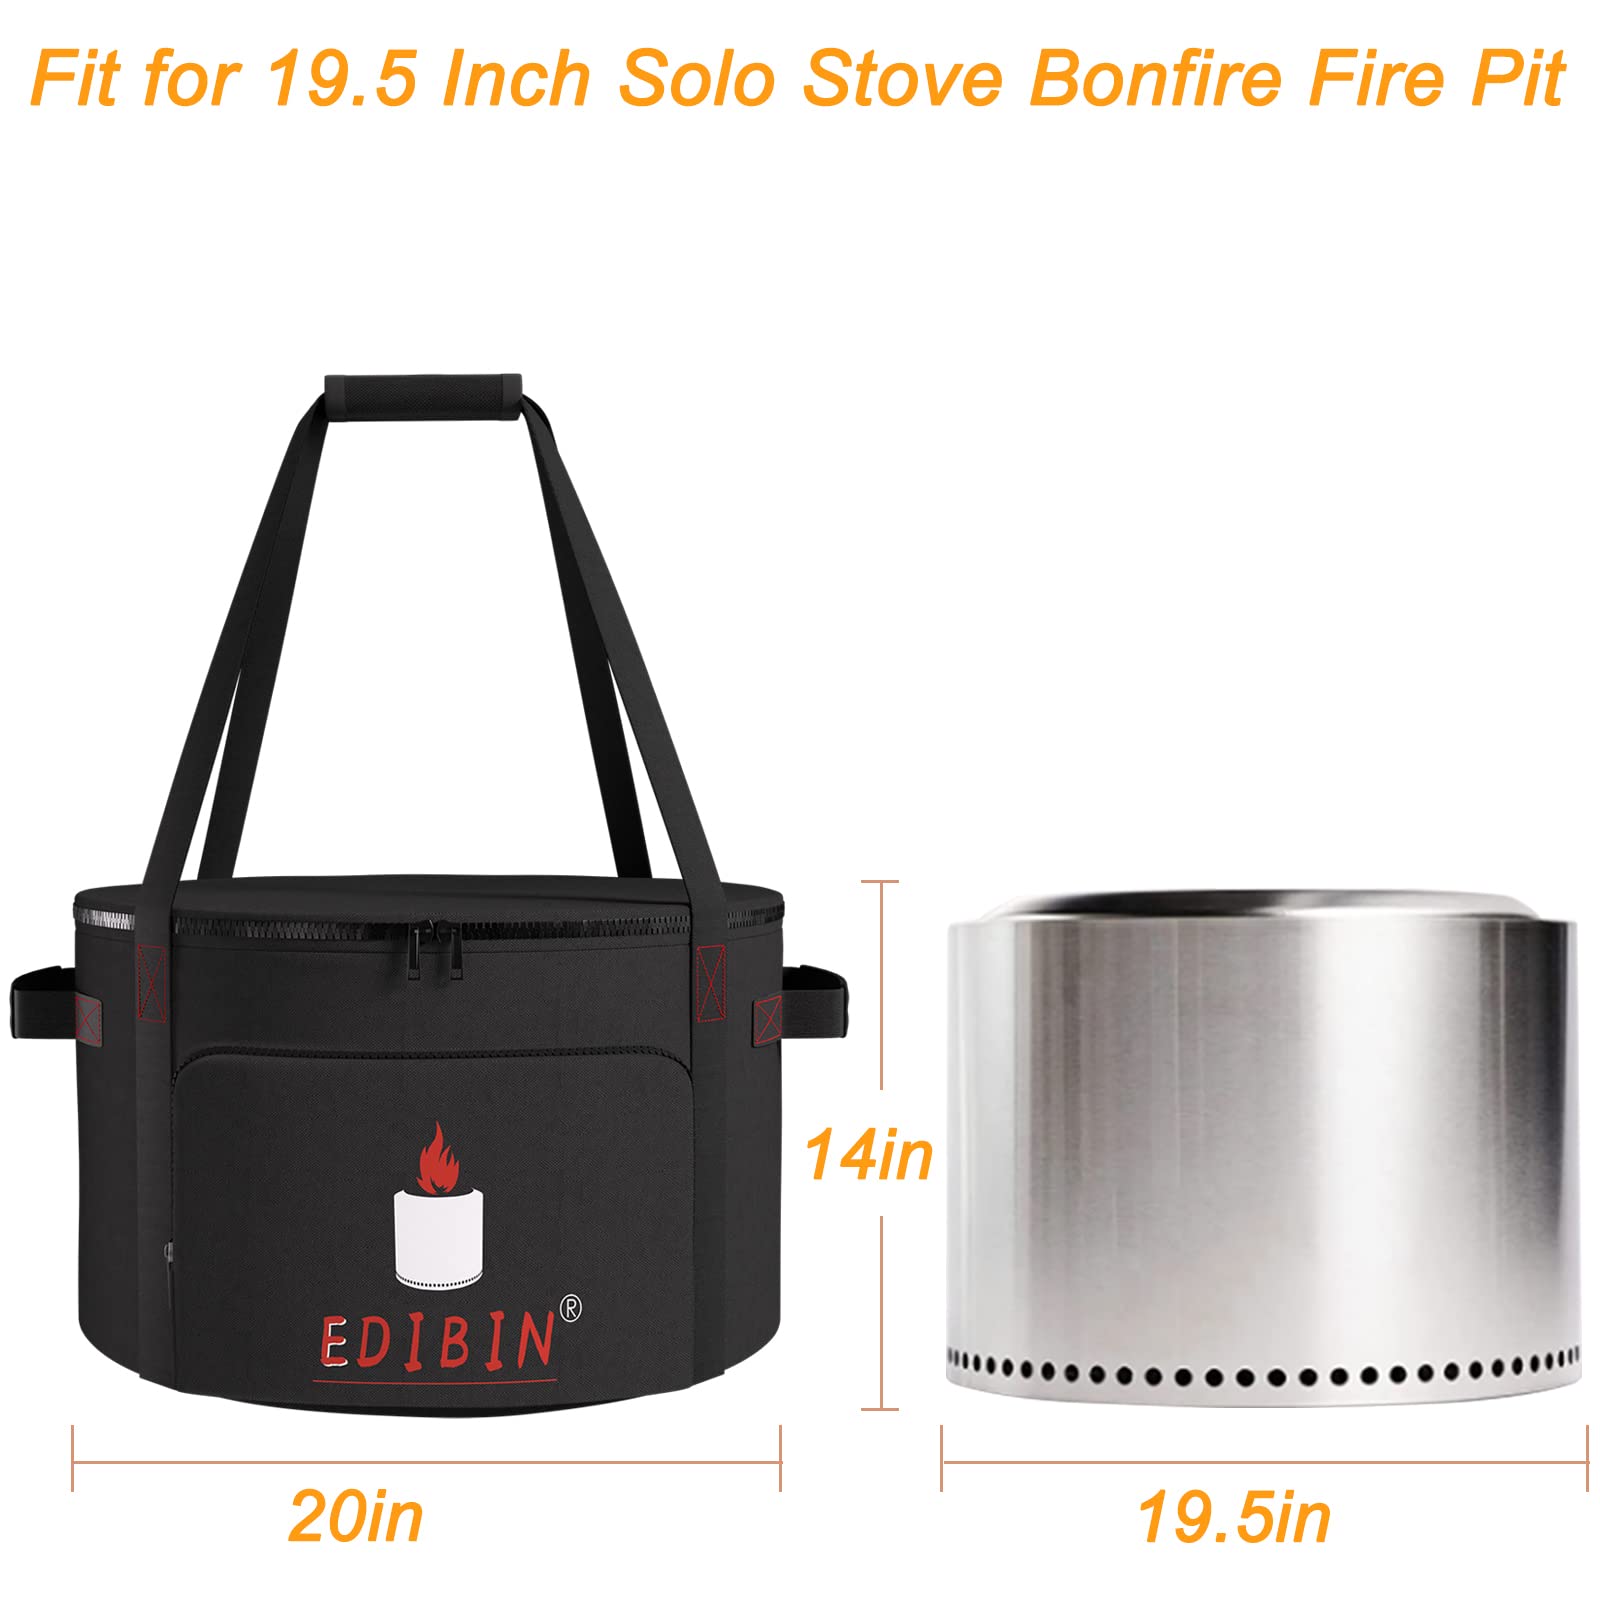 Outdoor Smokeless Fire Pit Bag Compatible with Solo Stove Bonfire Fire Pit W x 19.5 Inch,H x 14 Inch Smokeless Fire Pit, Natural Wood Burning Firebowl(Only Bag)